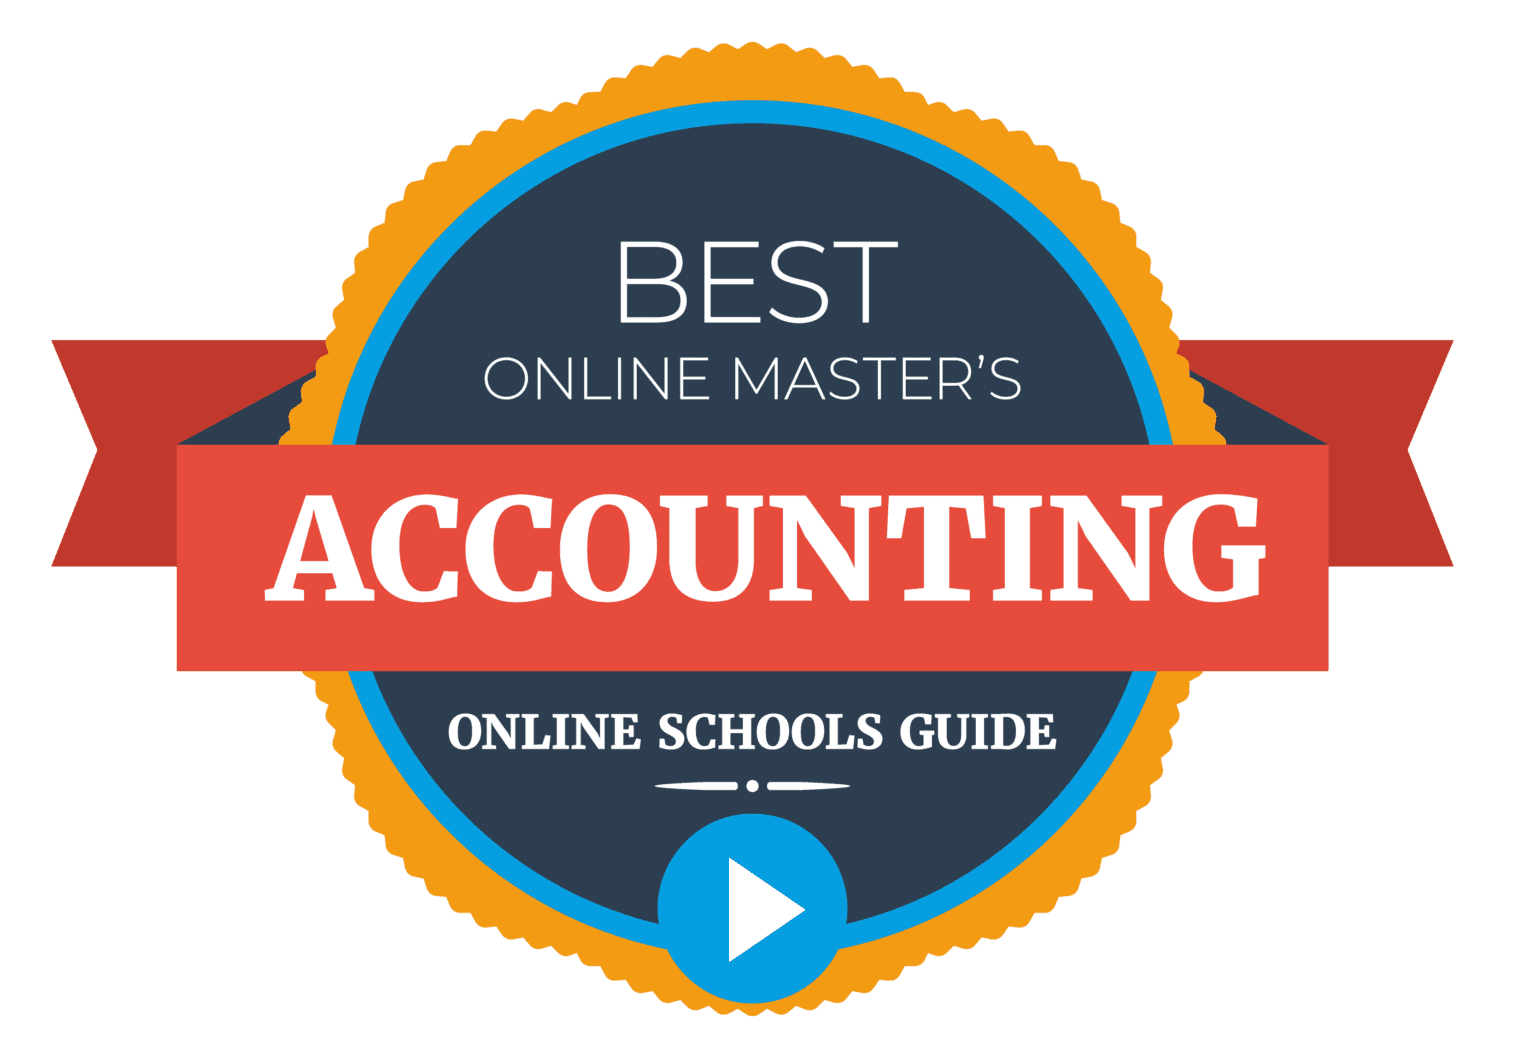 10-best-online-master-s-in-accounting-online-schools-guide